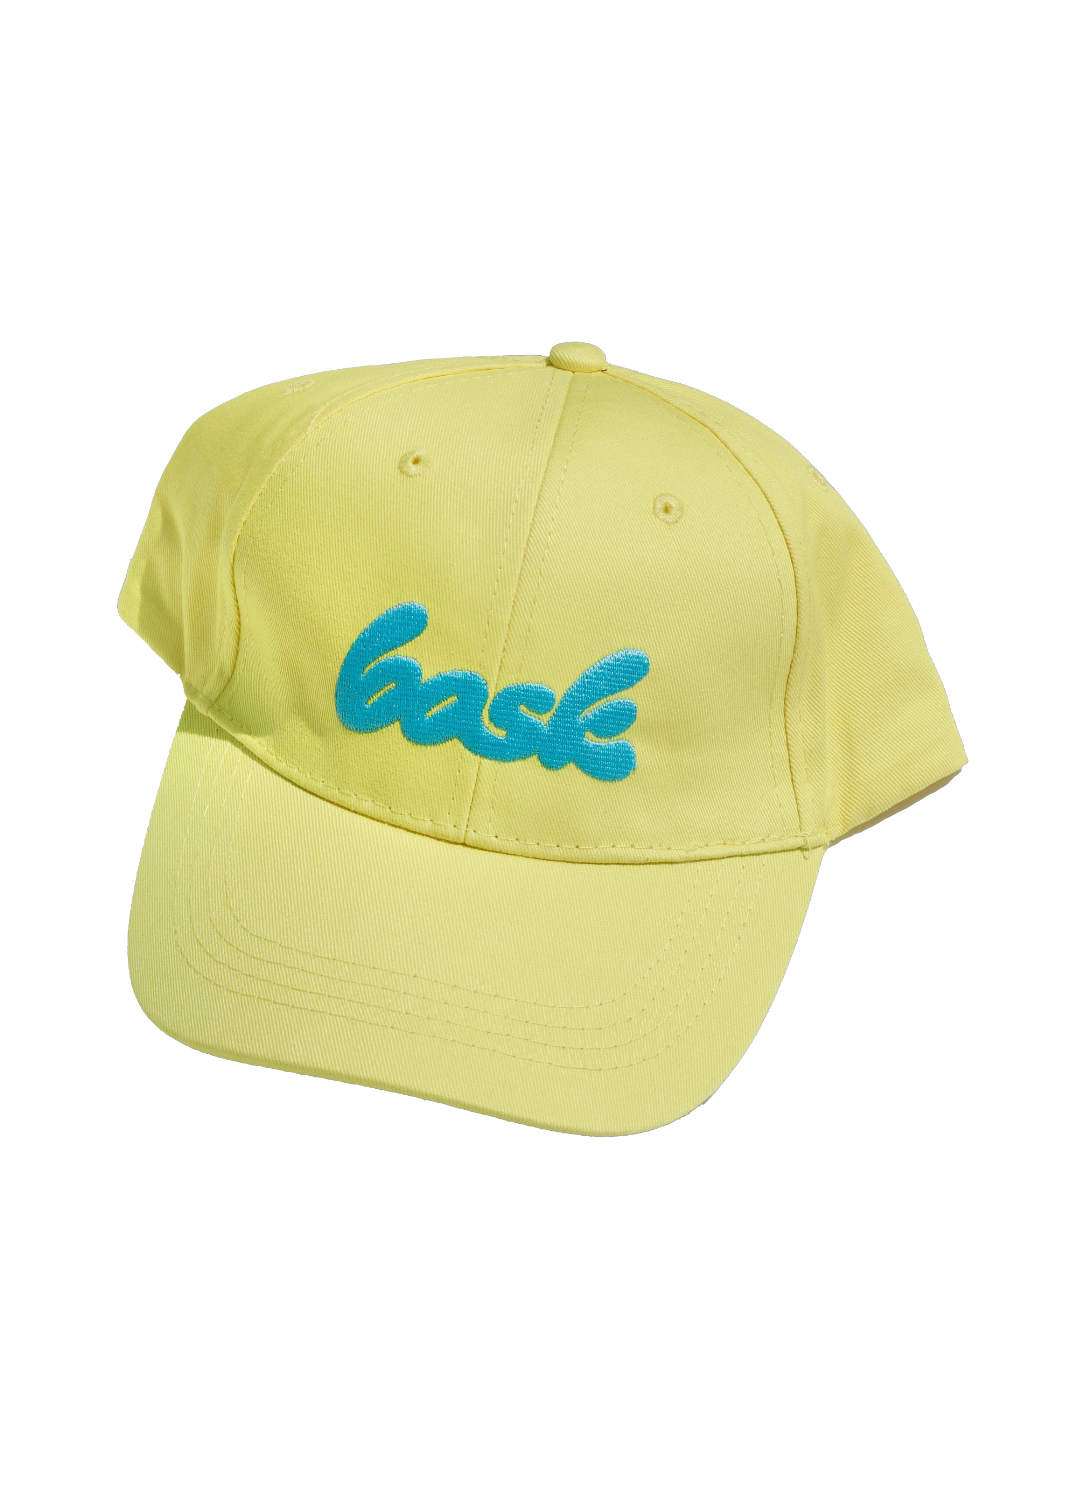 The Bask Dad Hat